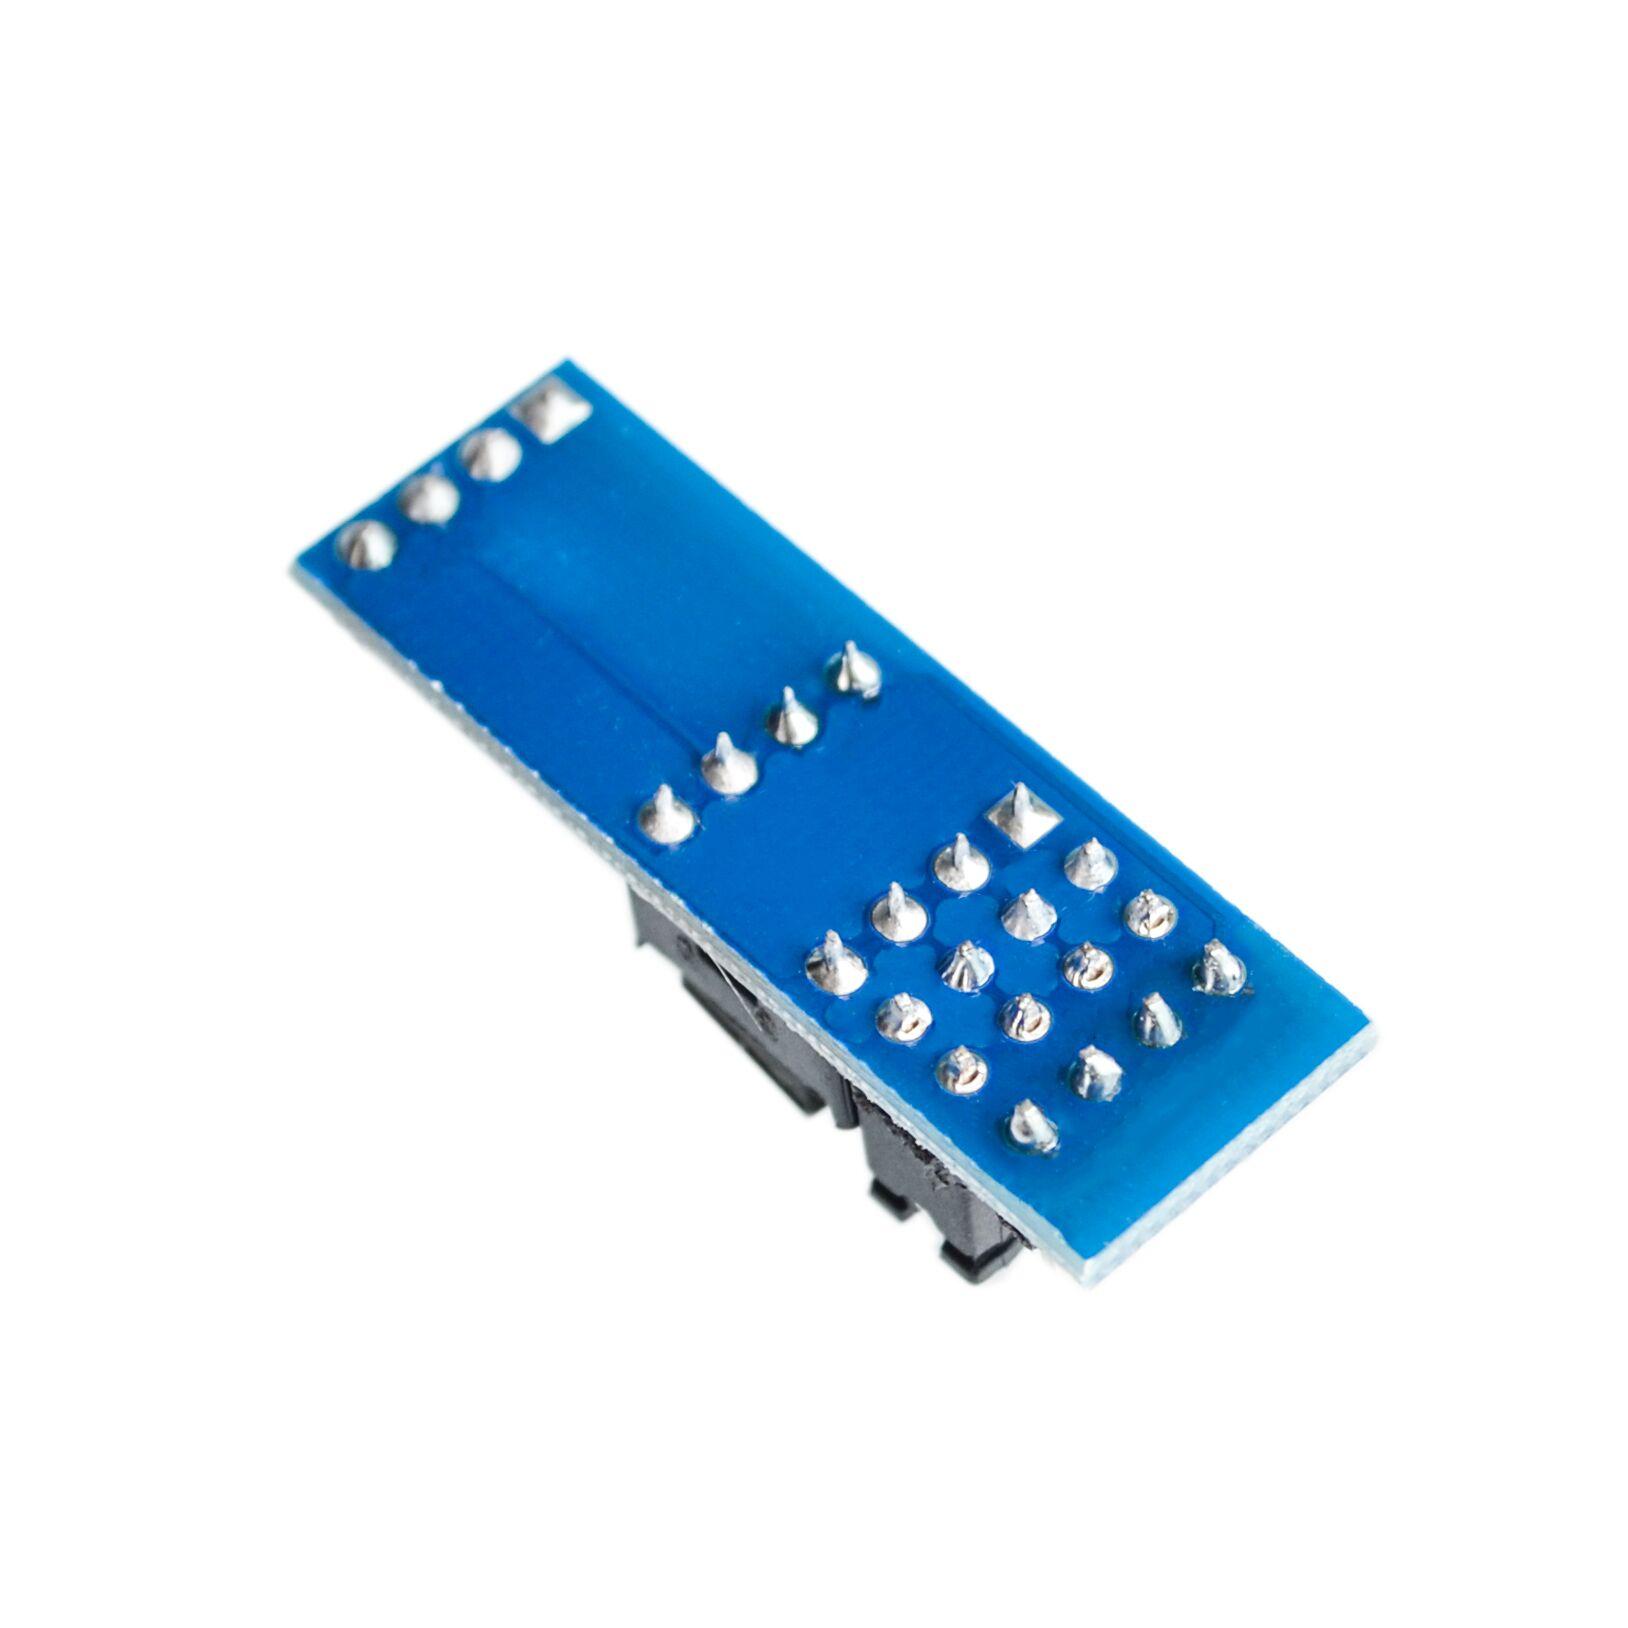 AT24C256-Memory-Module-I2C-Interface-EEPROM-in-stock